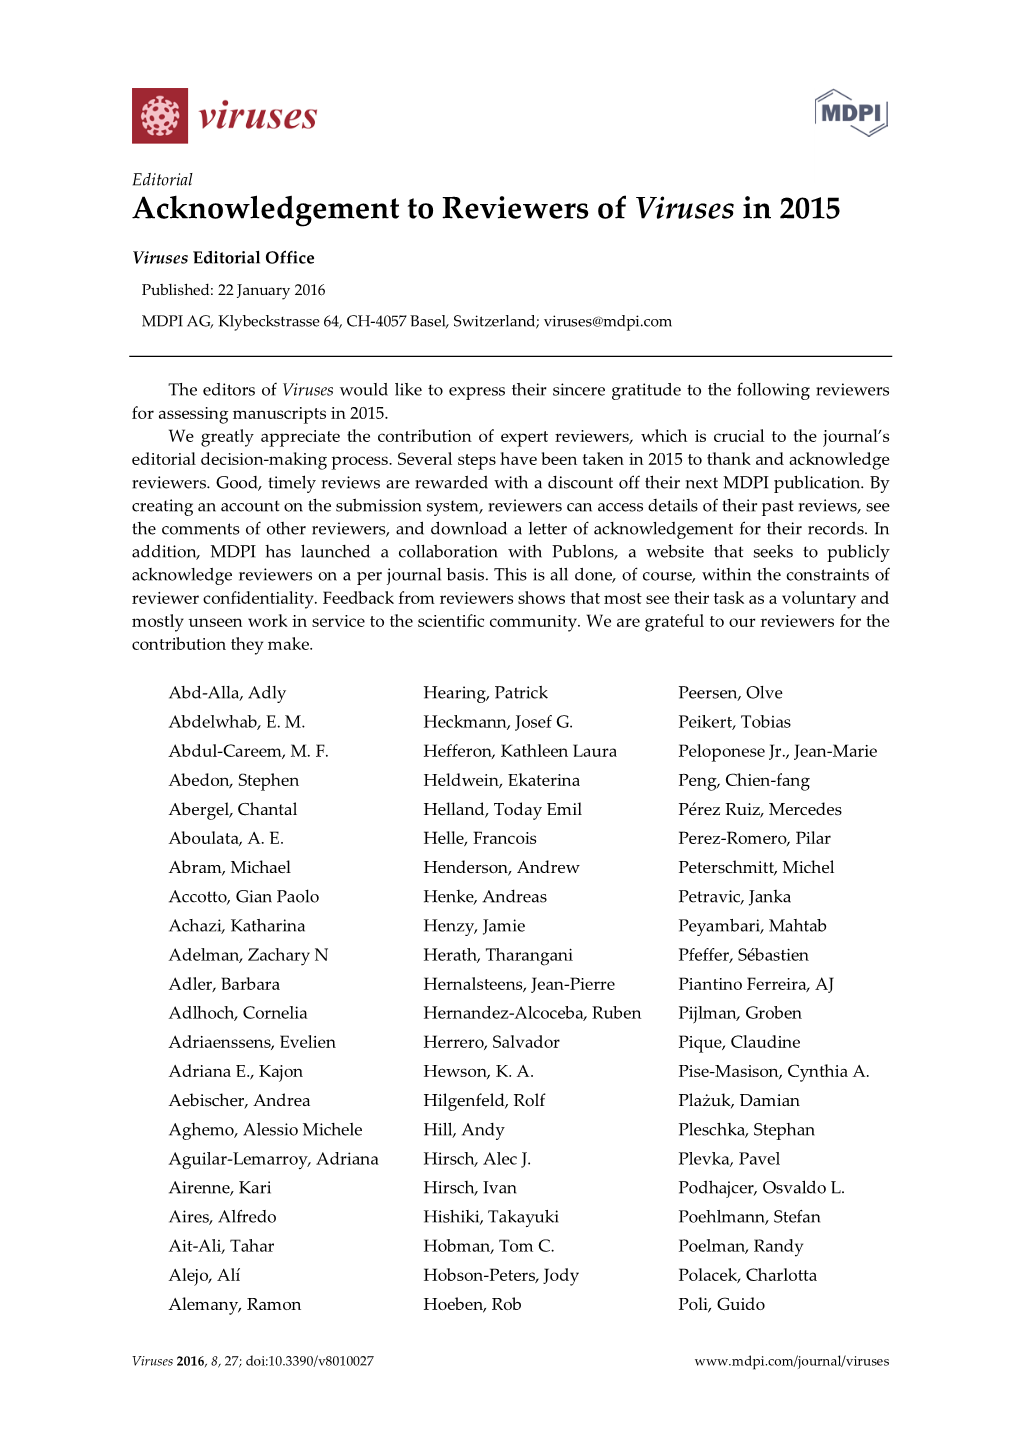 Acknowledgement to Reviewers of Viruses in 2015